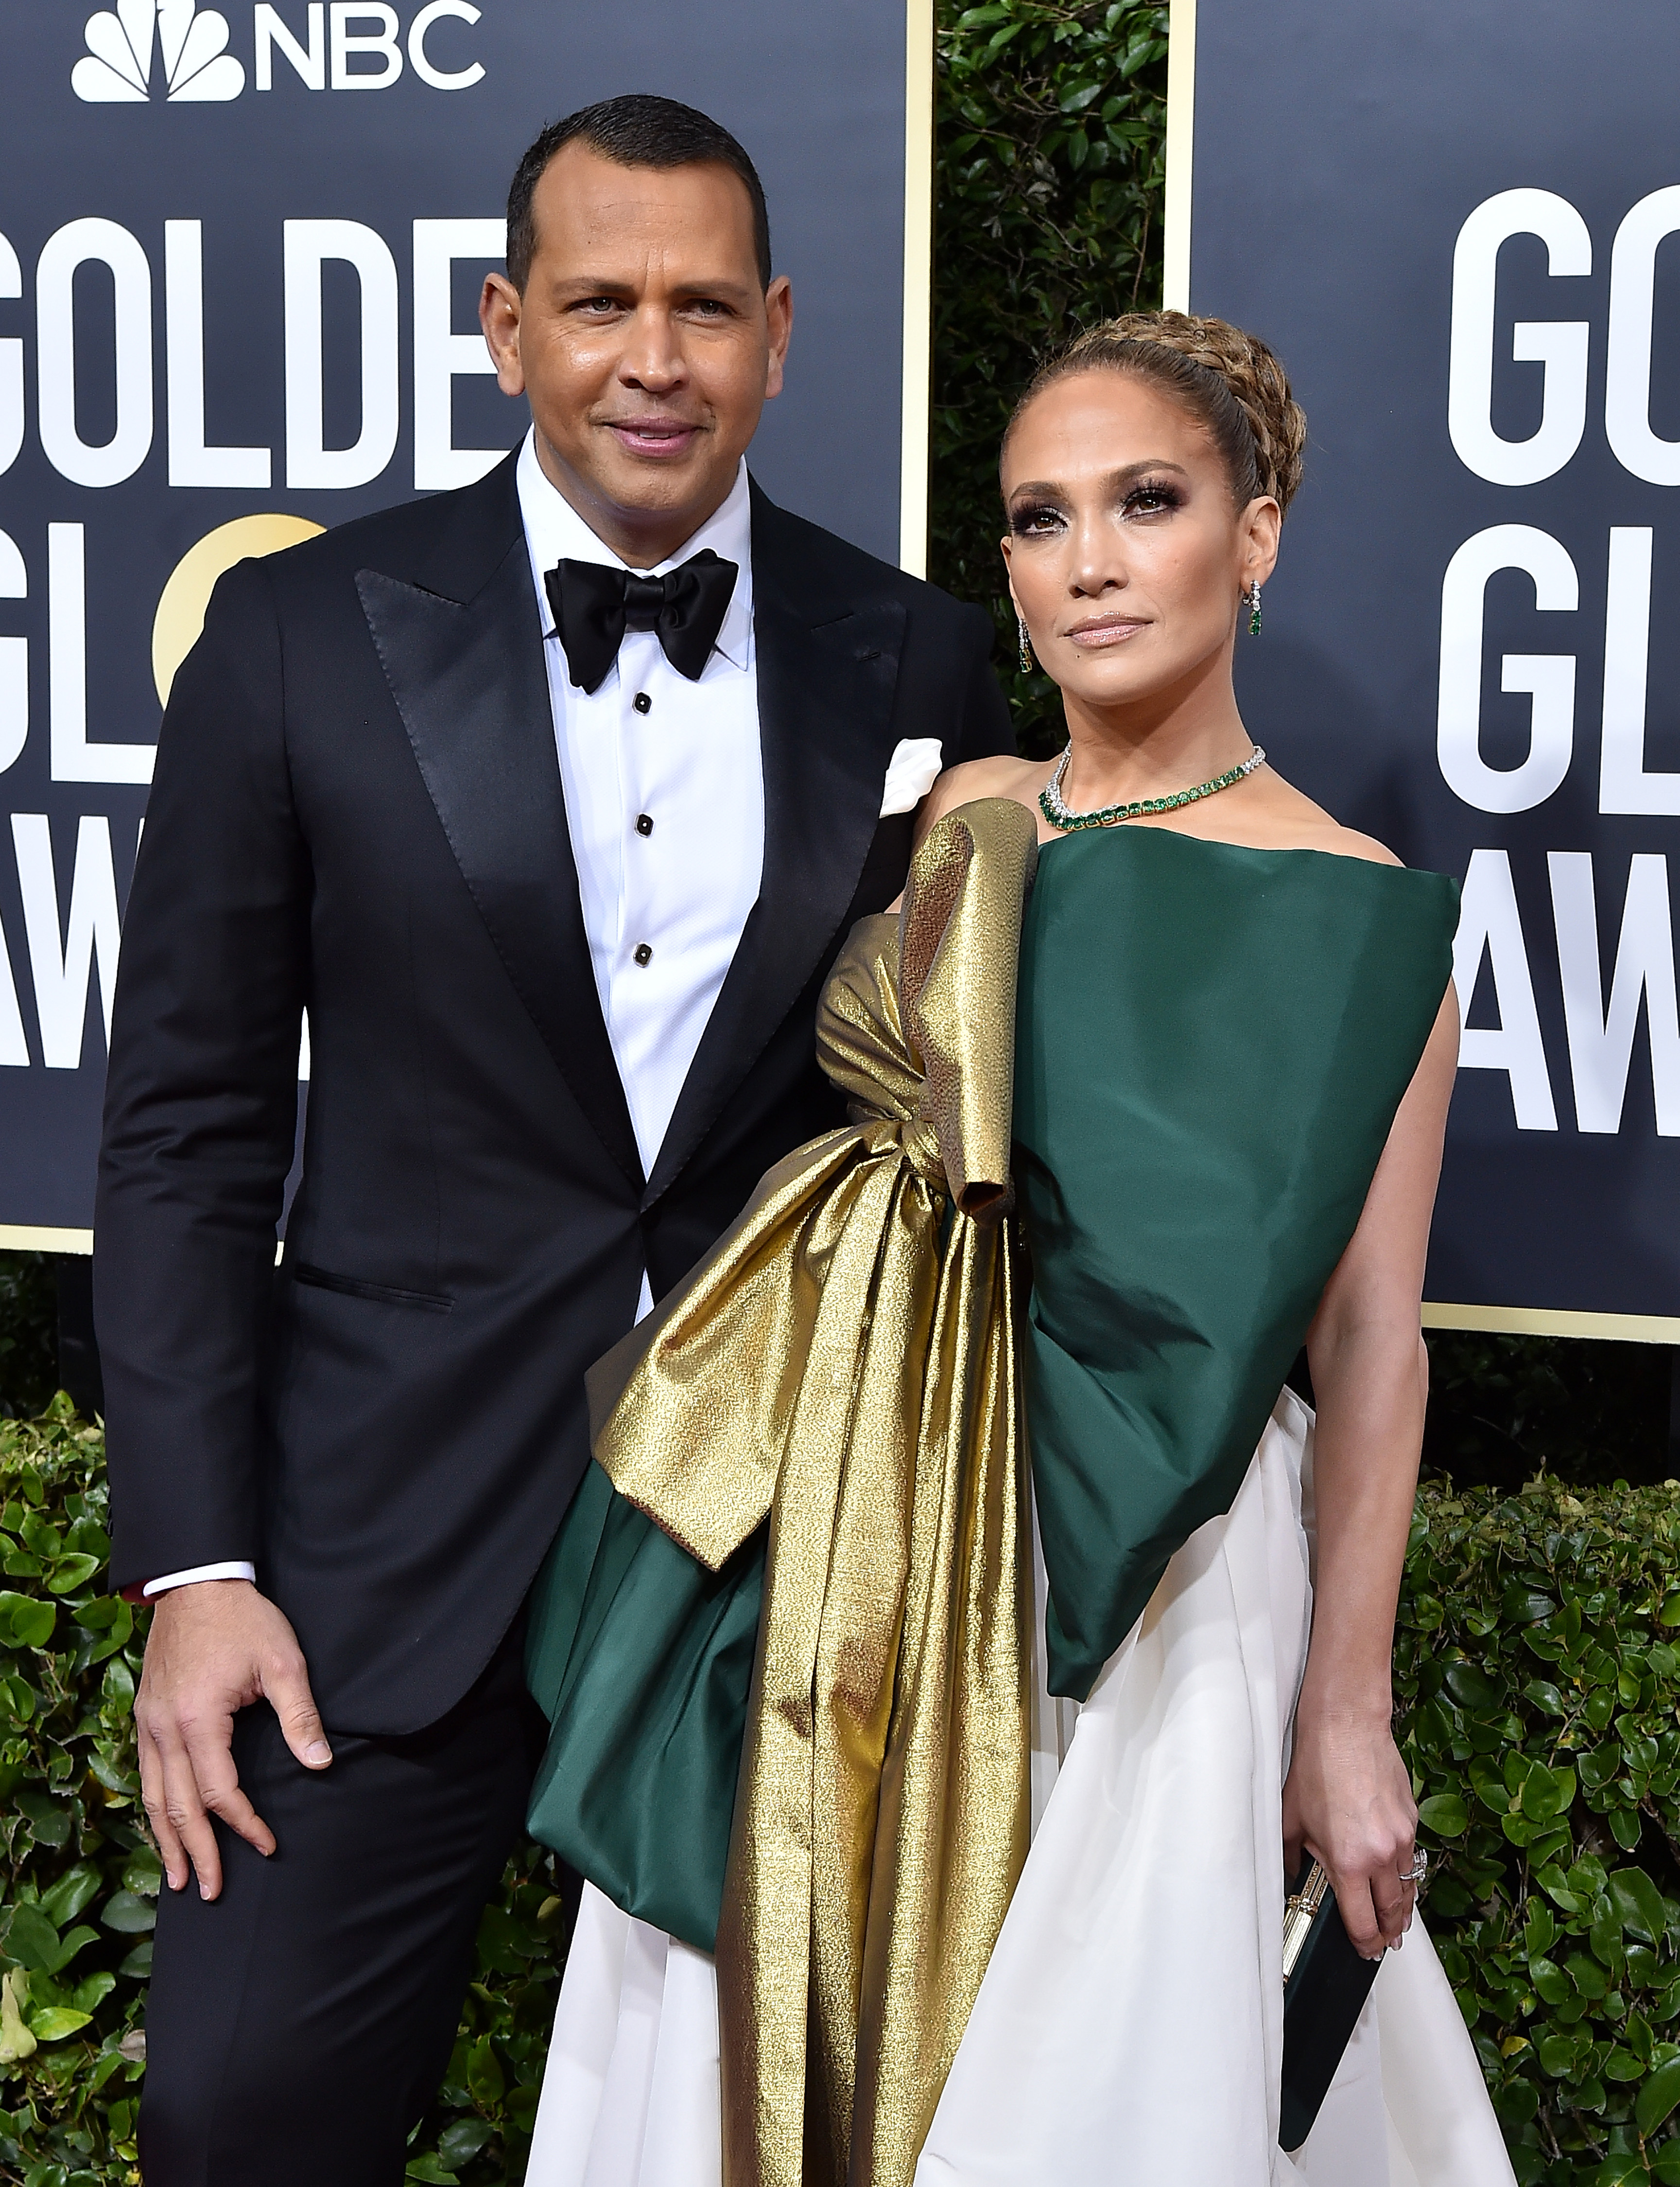 Alex Rodriguez and Jennifer Lopez at the 77th Annual Golden Globe Awards on January 5, 2020, in Beverly Hills, California | Source: Getty Images